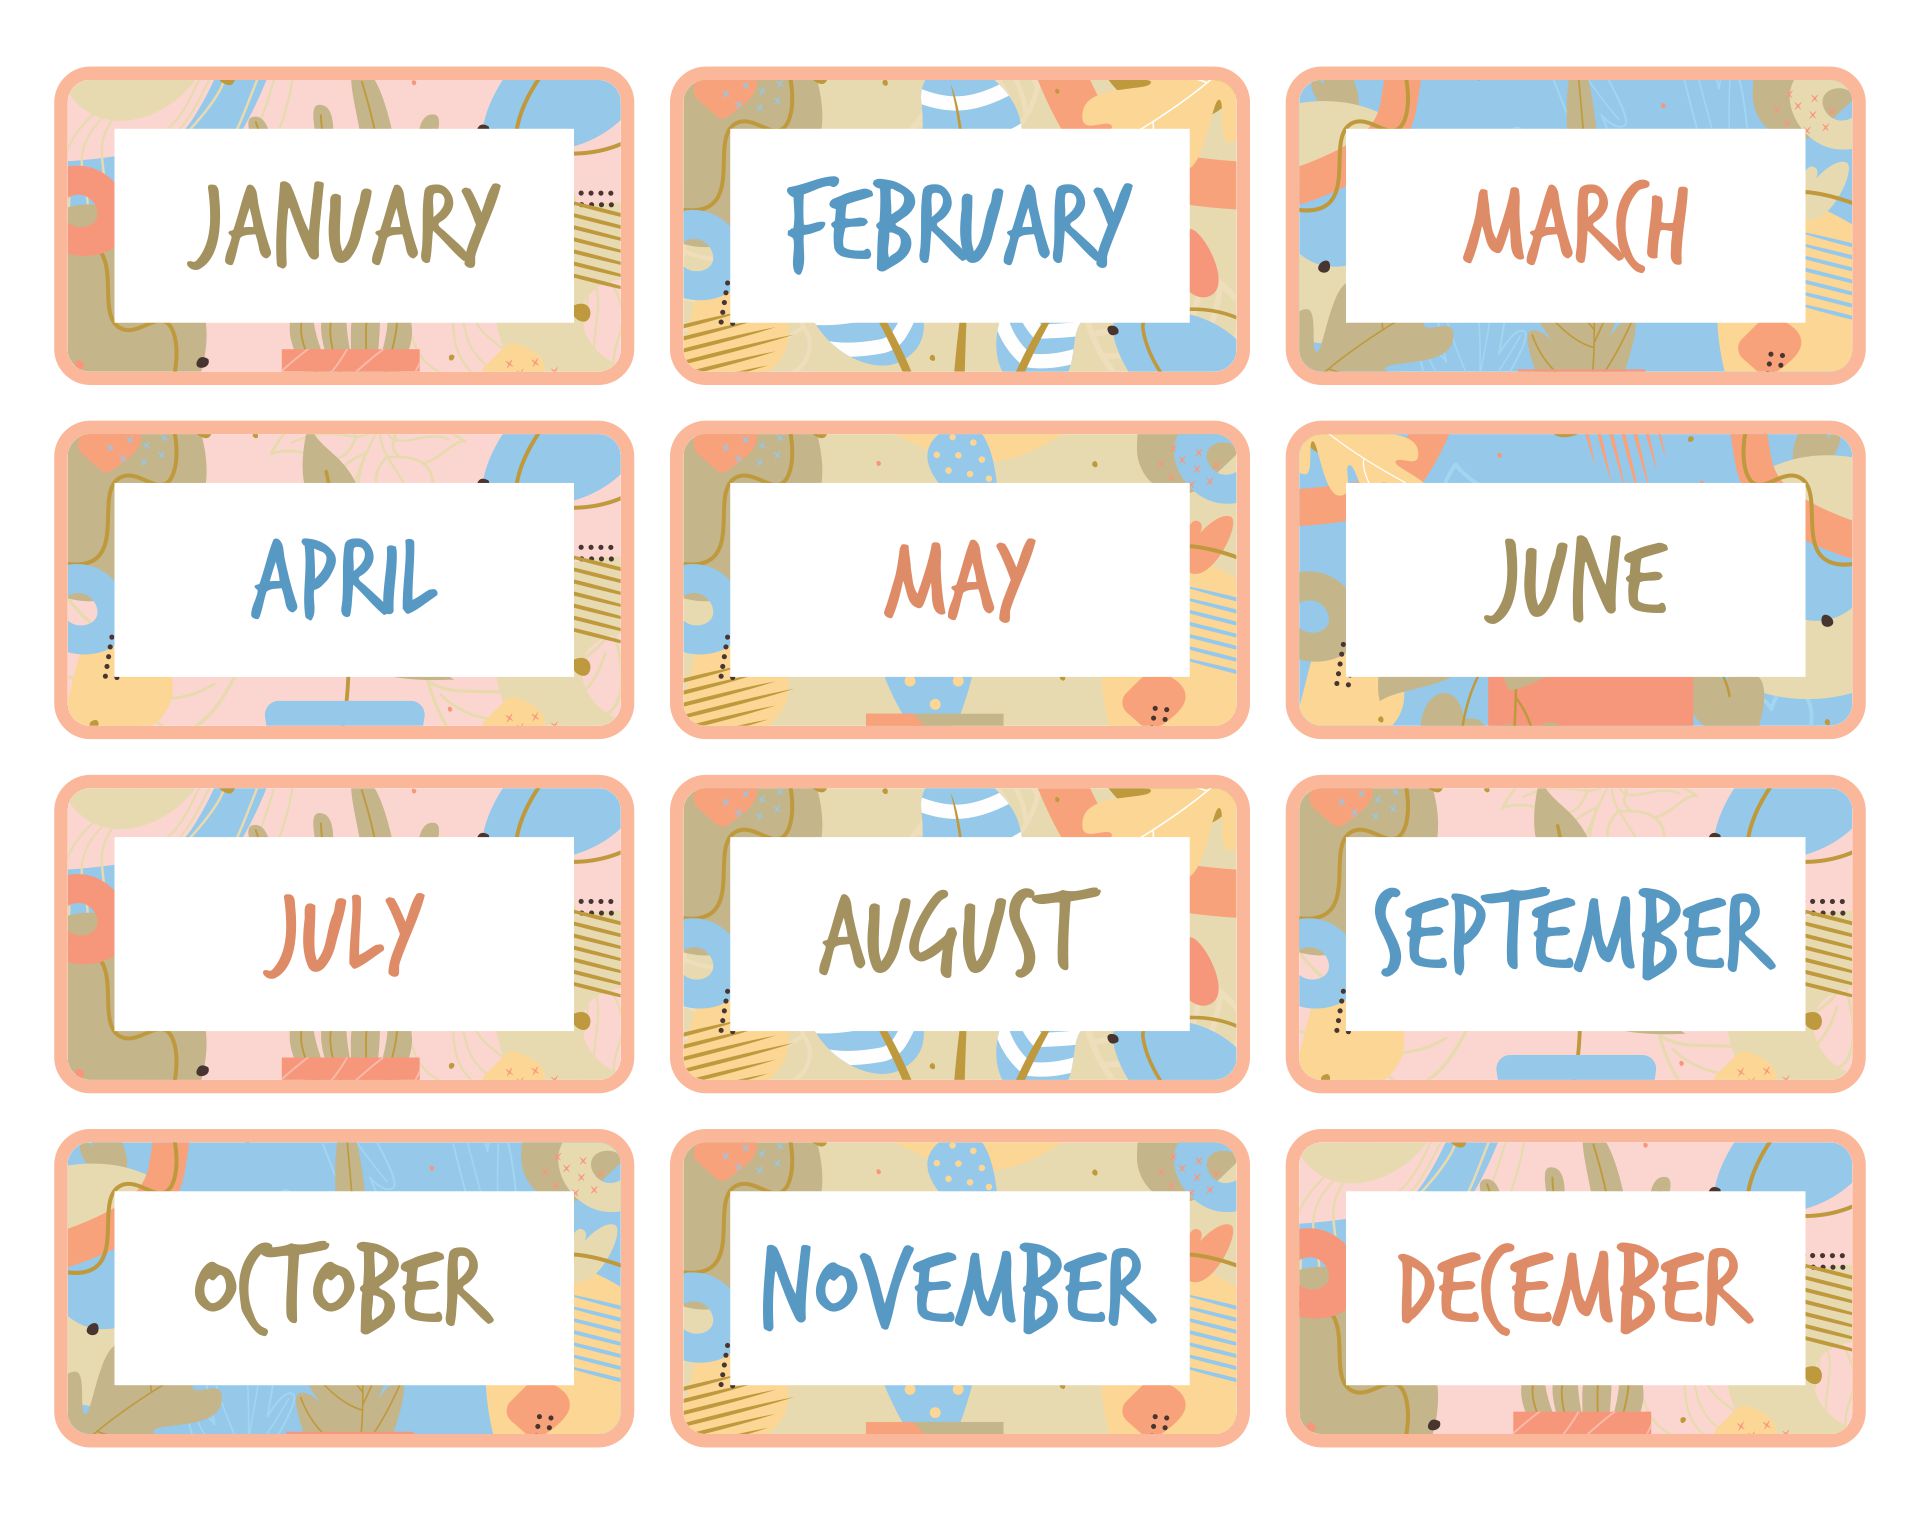 4 Best Images of Printable Classroom Calendar Months Months of the